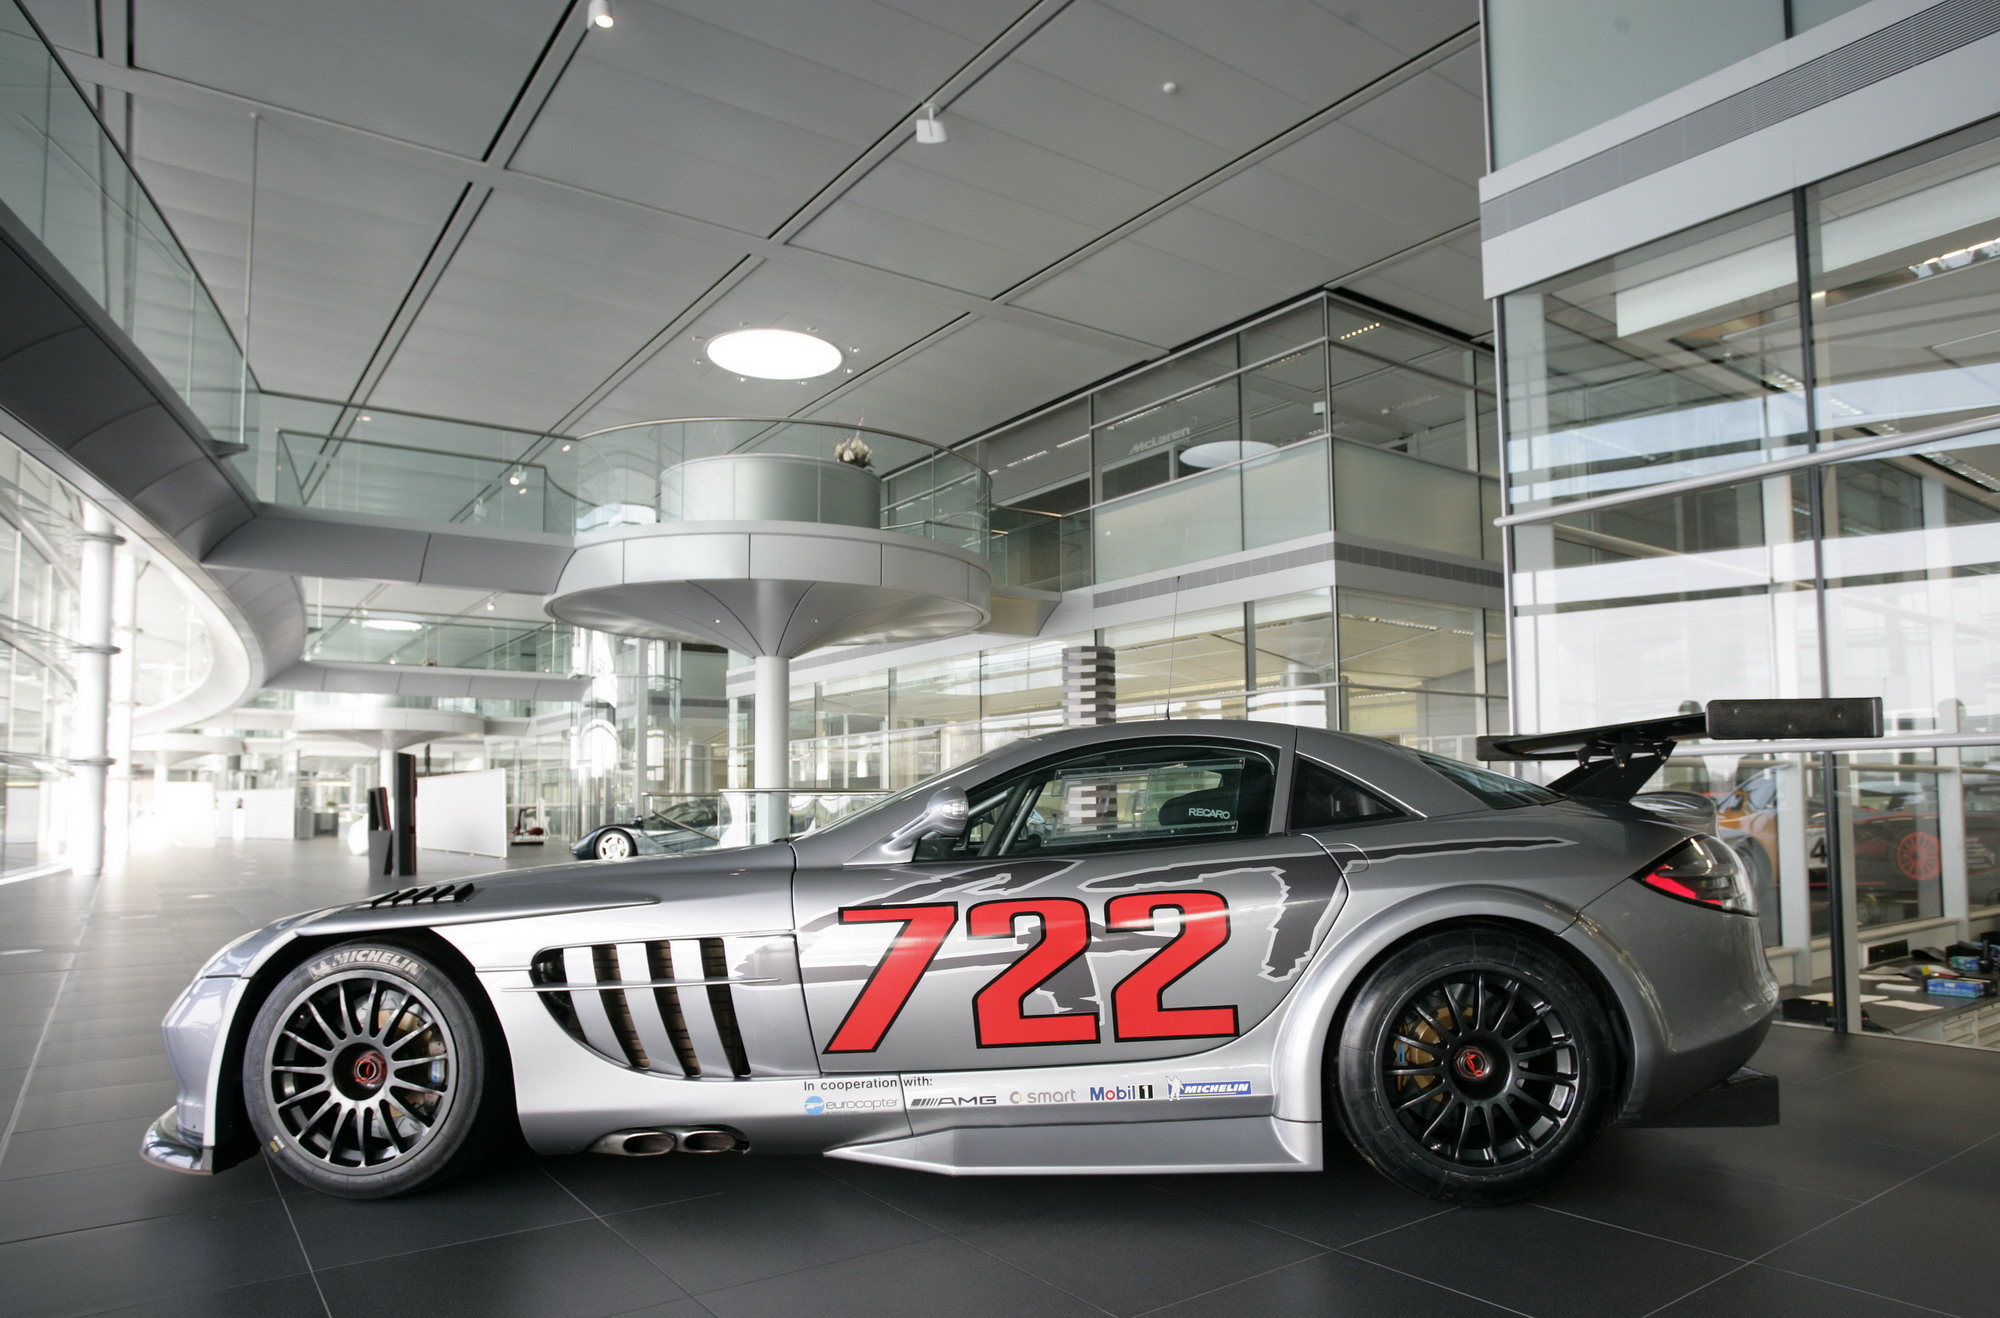 You can vote for this Mercedes-Benz SLR722 GT McLaren photo